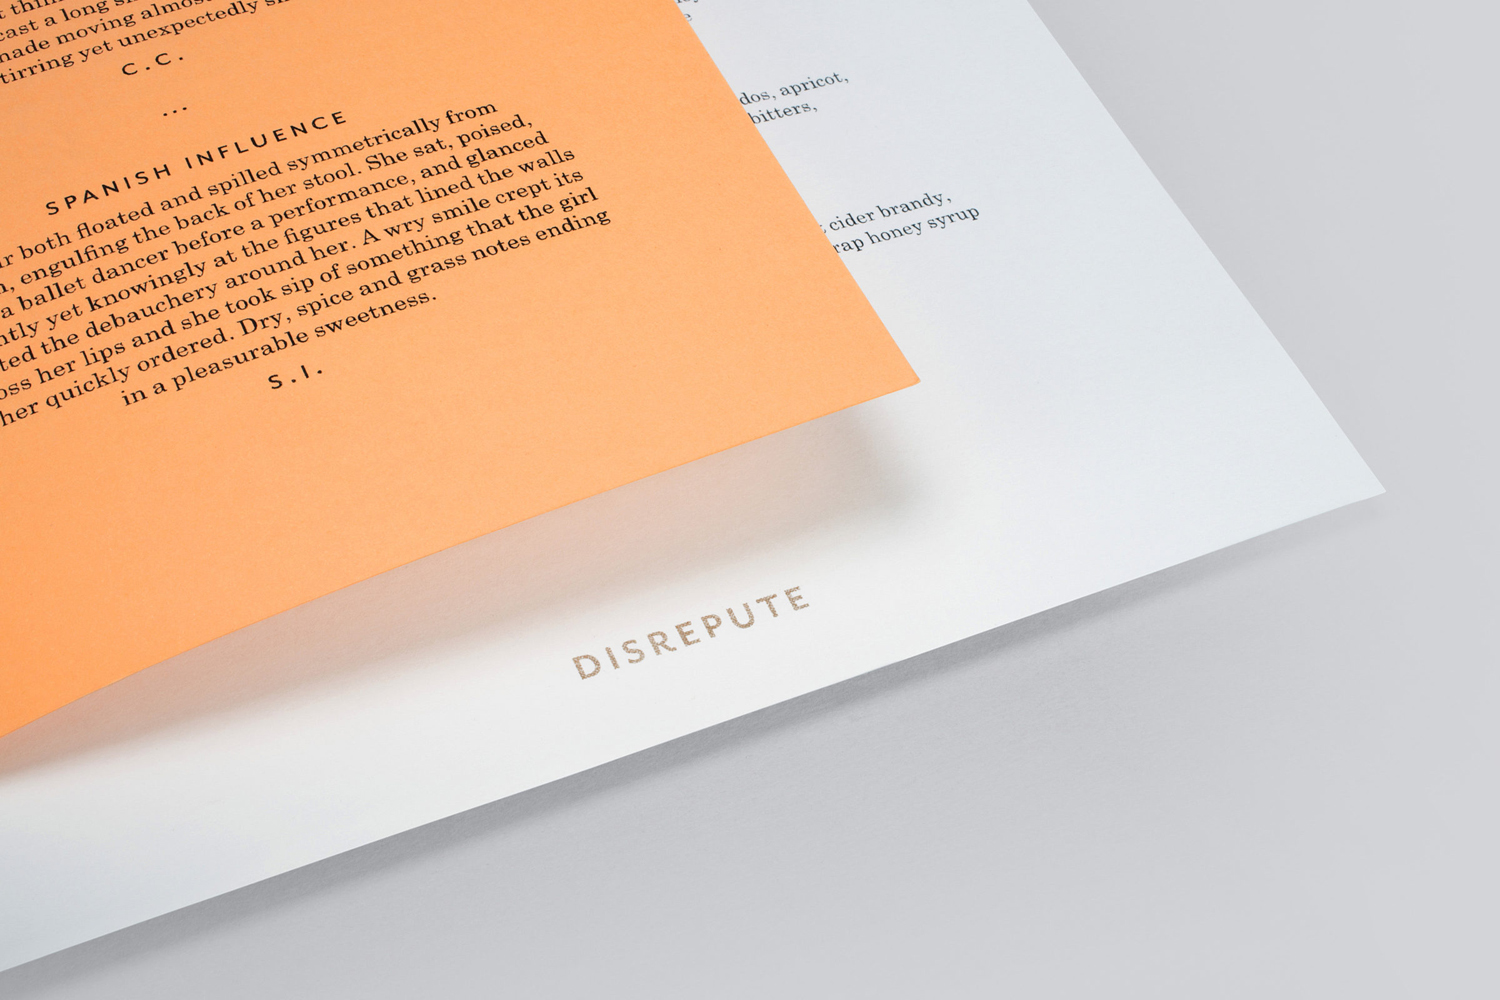 Brand identity and print featuring Arjowiggins Pop’set Apricot designed by London-based studio Two Times Elliott for Soho members bar Disrepute